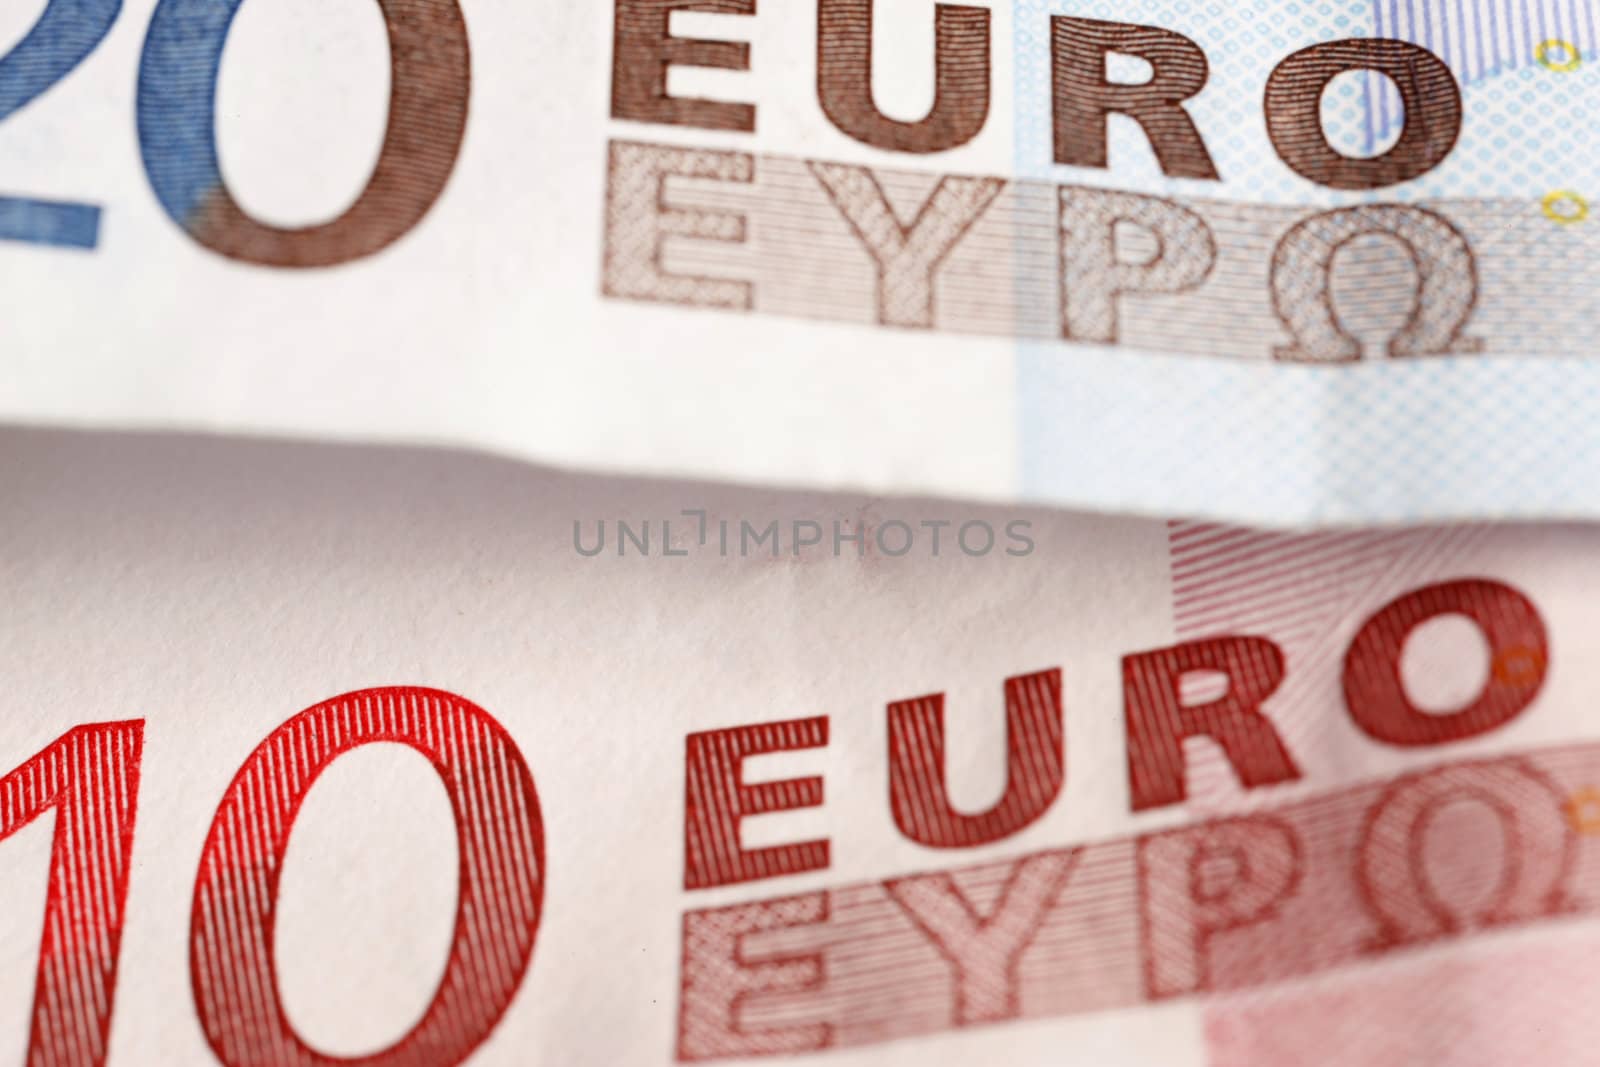 Detail of a Euro banknote with big DOF